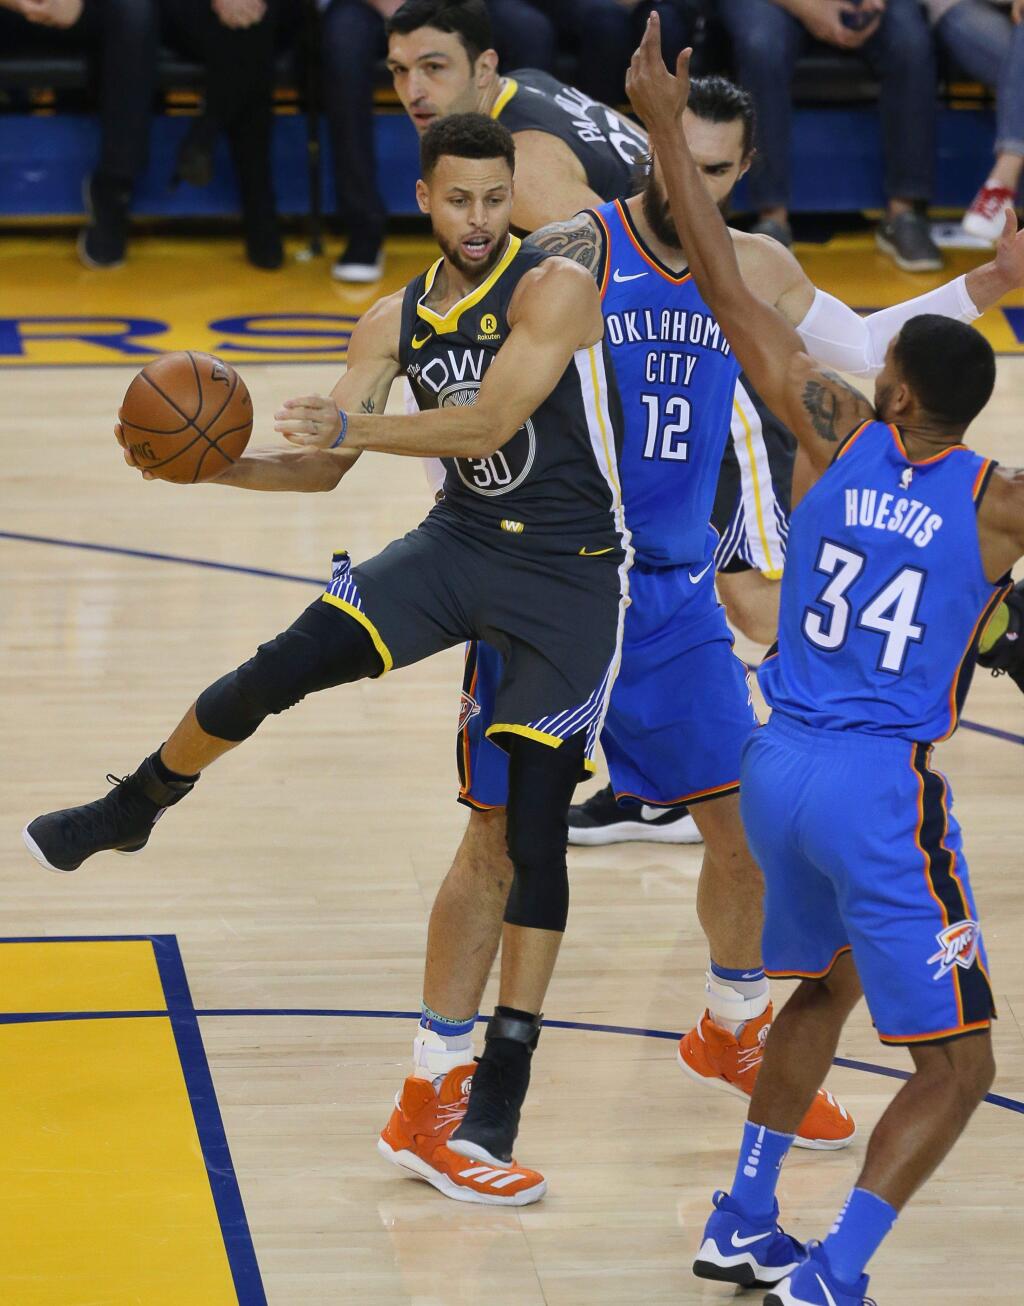 Golden State Warriors guard Stephen Curry dishes off a pass around Oklahoma City Thunder forward Josh Huestis during their game in Oakland on Tuesday, February 6, 2018. (Christopher Chung/ The Press Democrat)